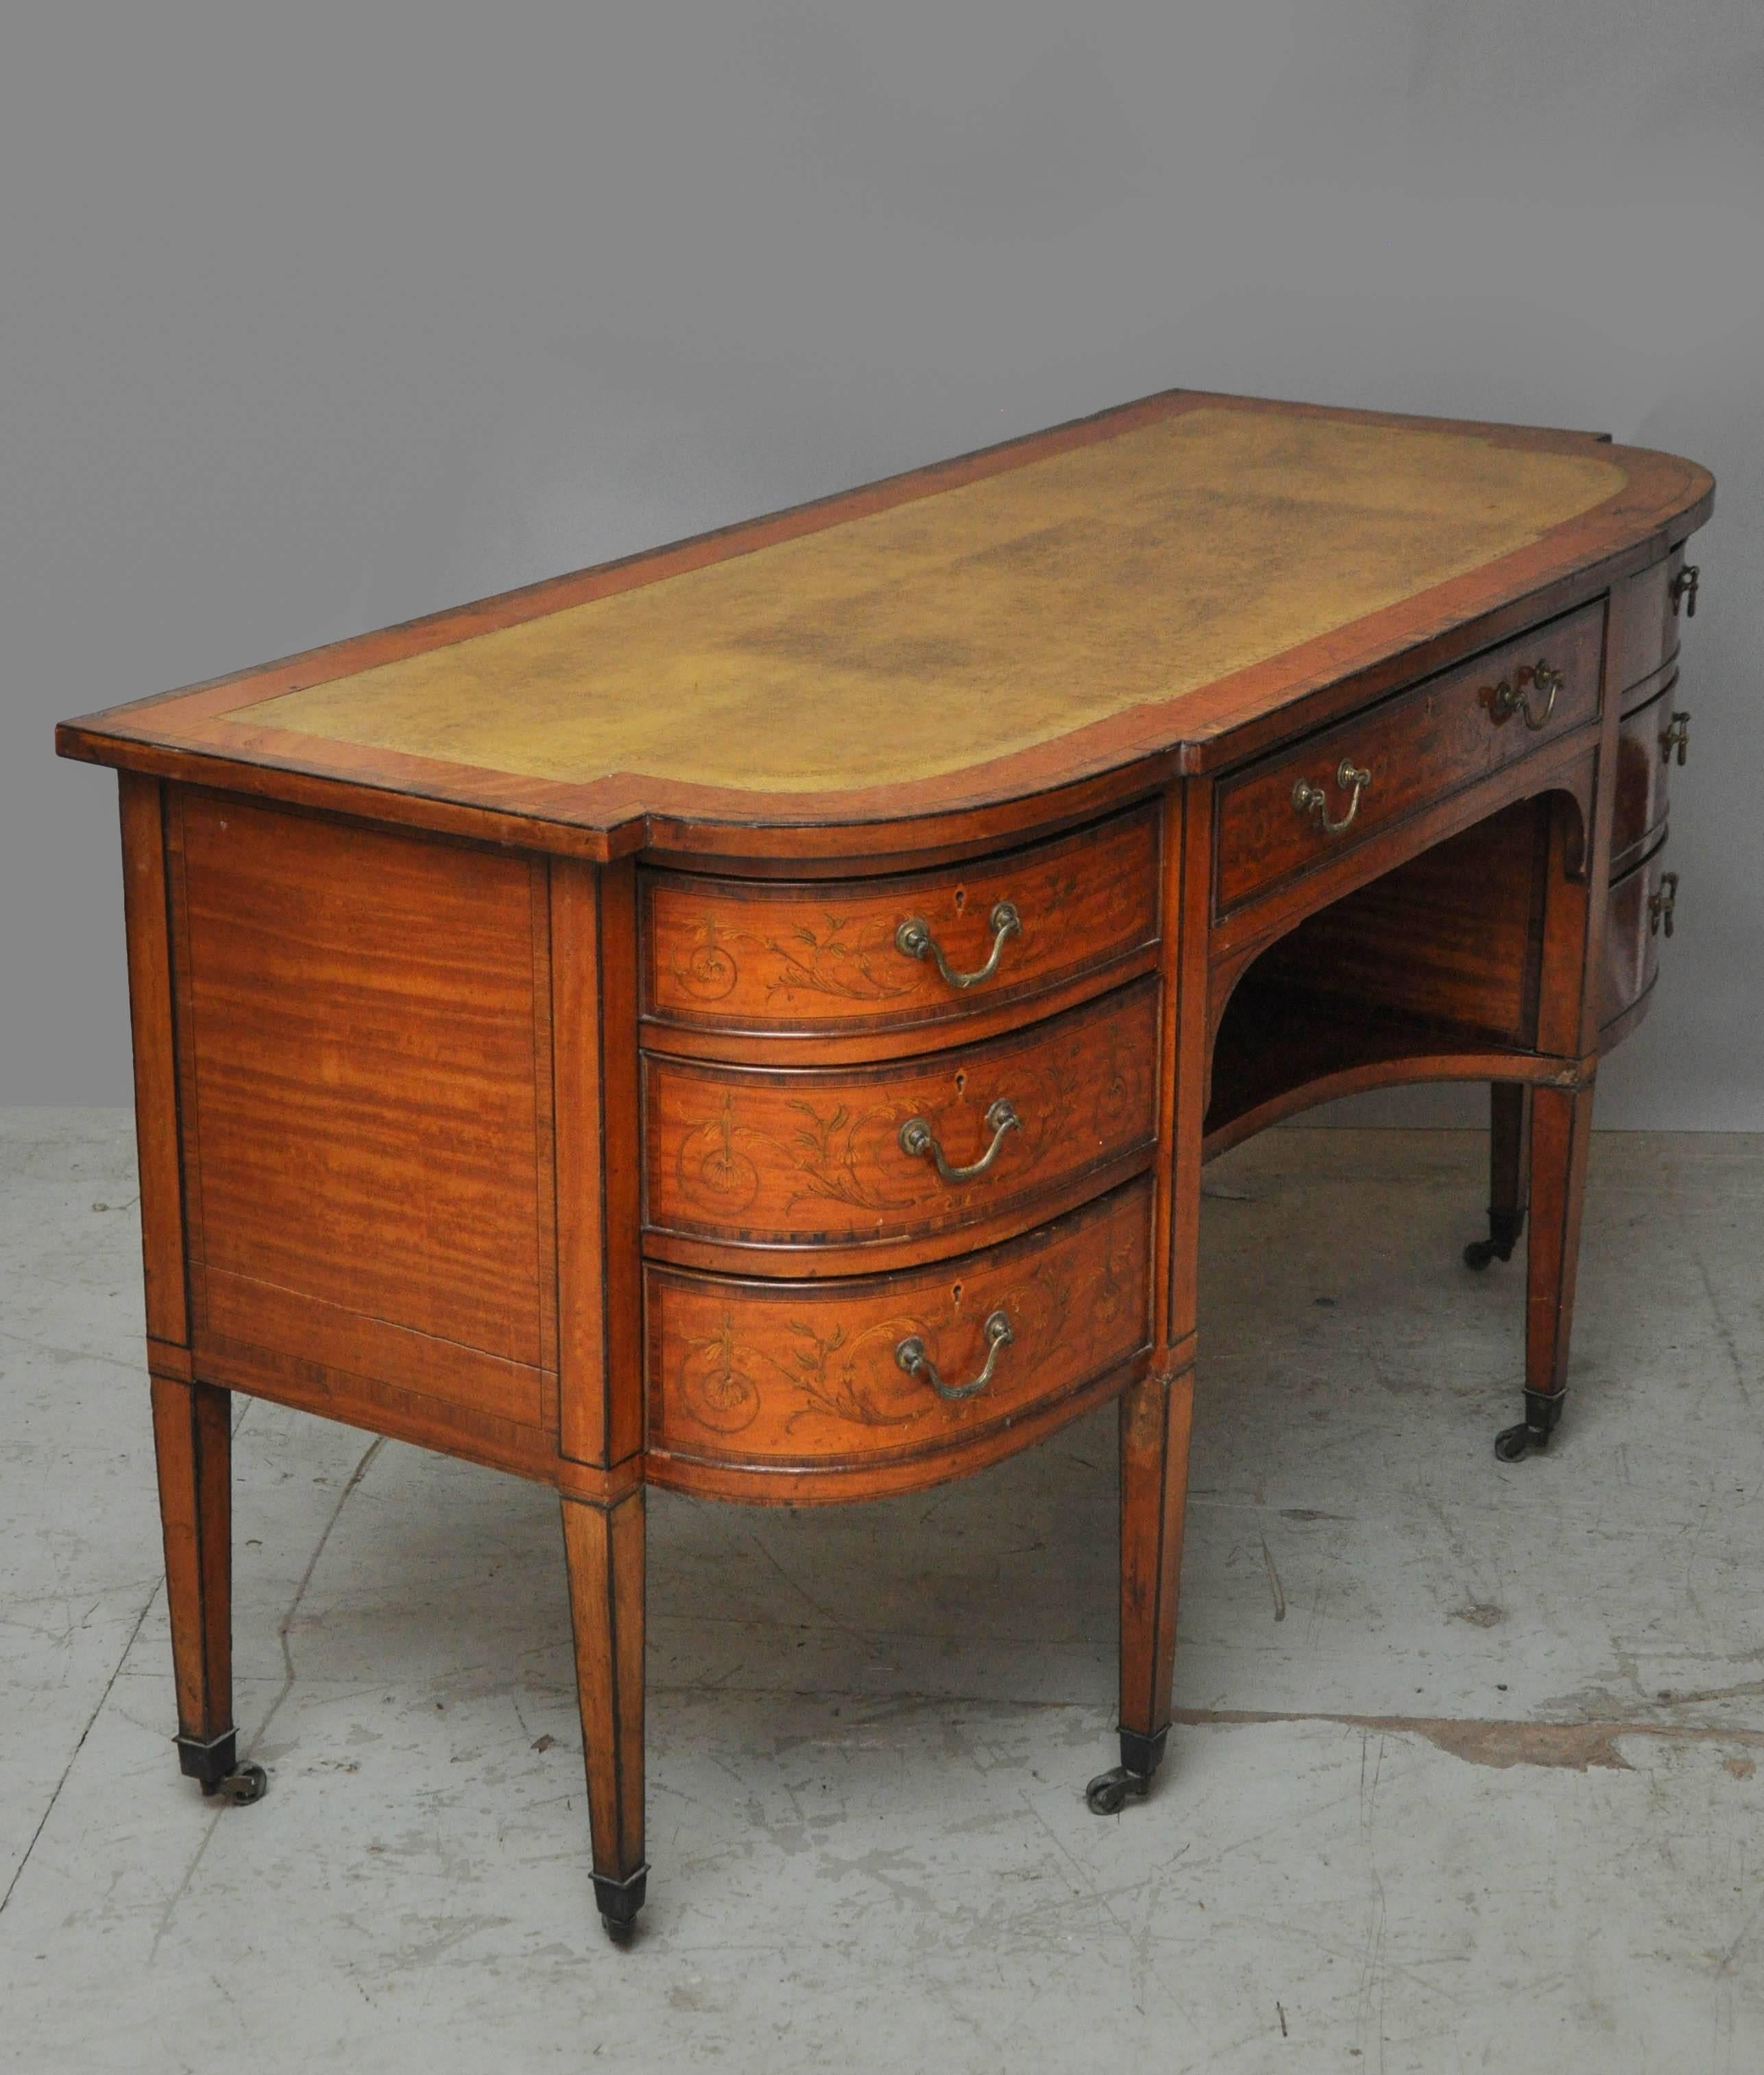 Edwardian Period Sheraton Revival Writing Table by Maple & Co. of London, 1905 For Sale 1